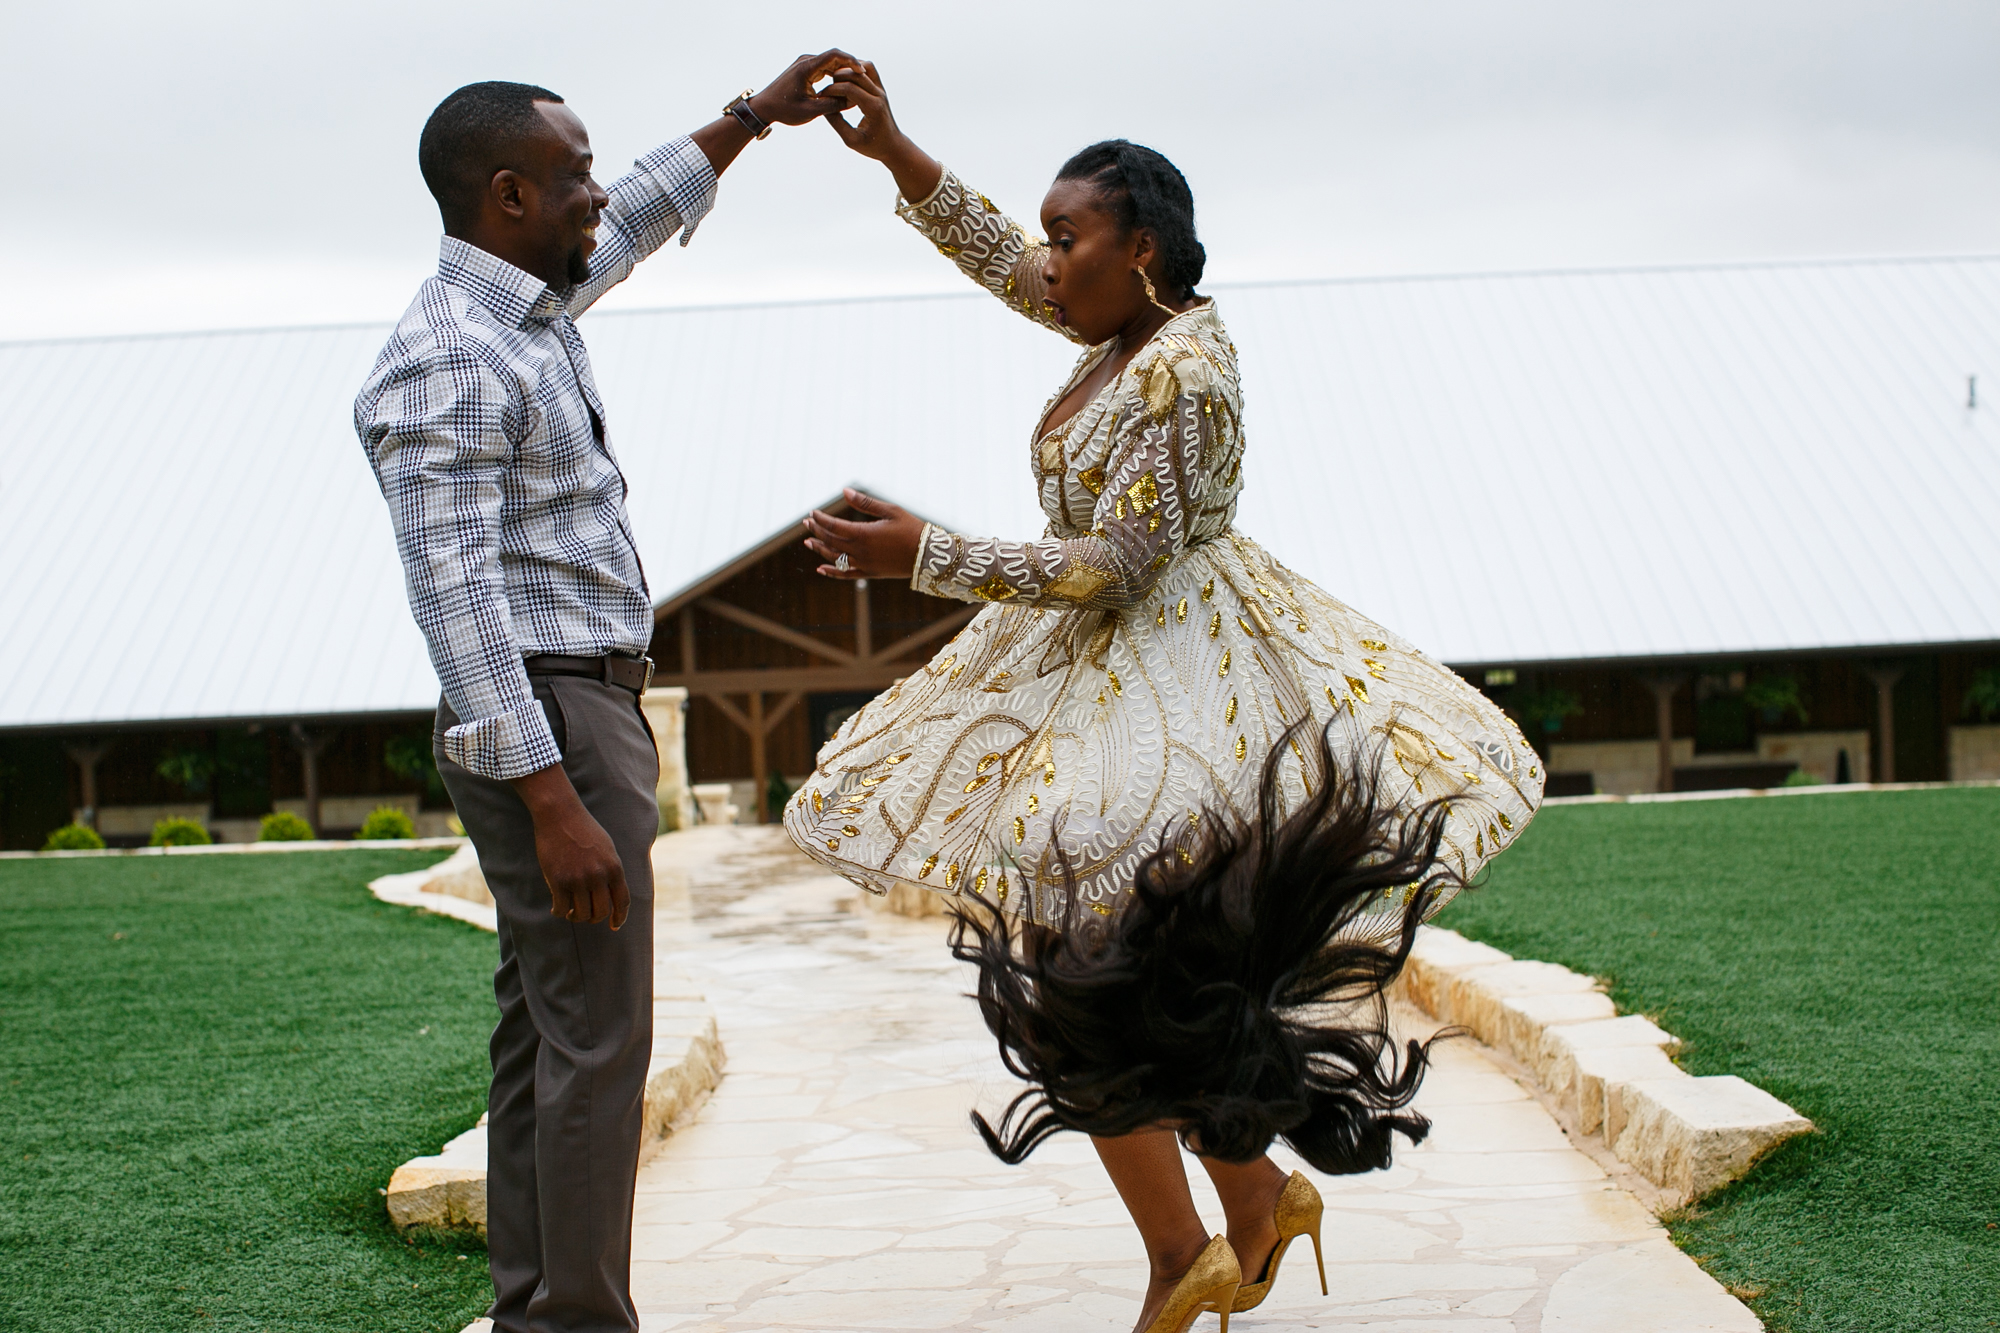 PHOTO: These engagement photos of Jessica Chinyelu Ezeanya and her fiance Hilary Anibowei, of Dallas, Texas, have gone viral on social media.